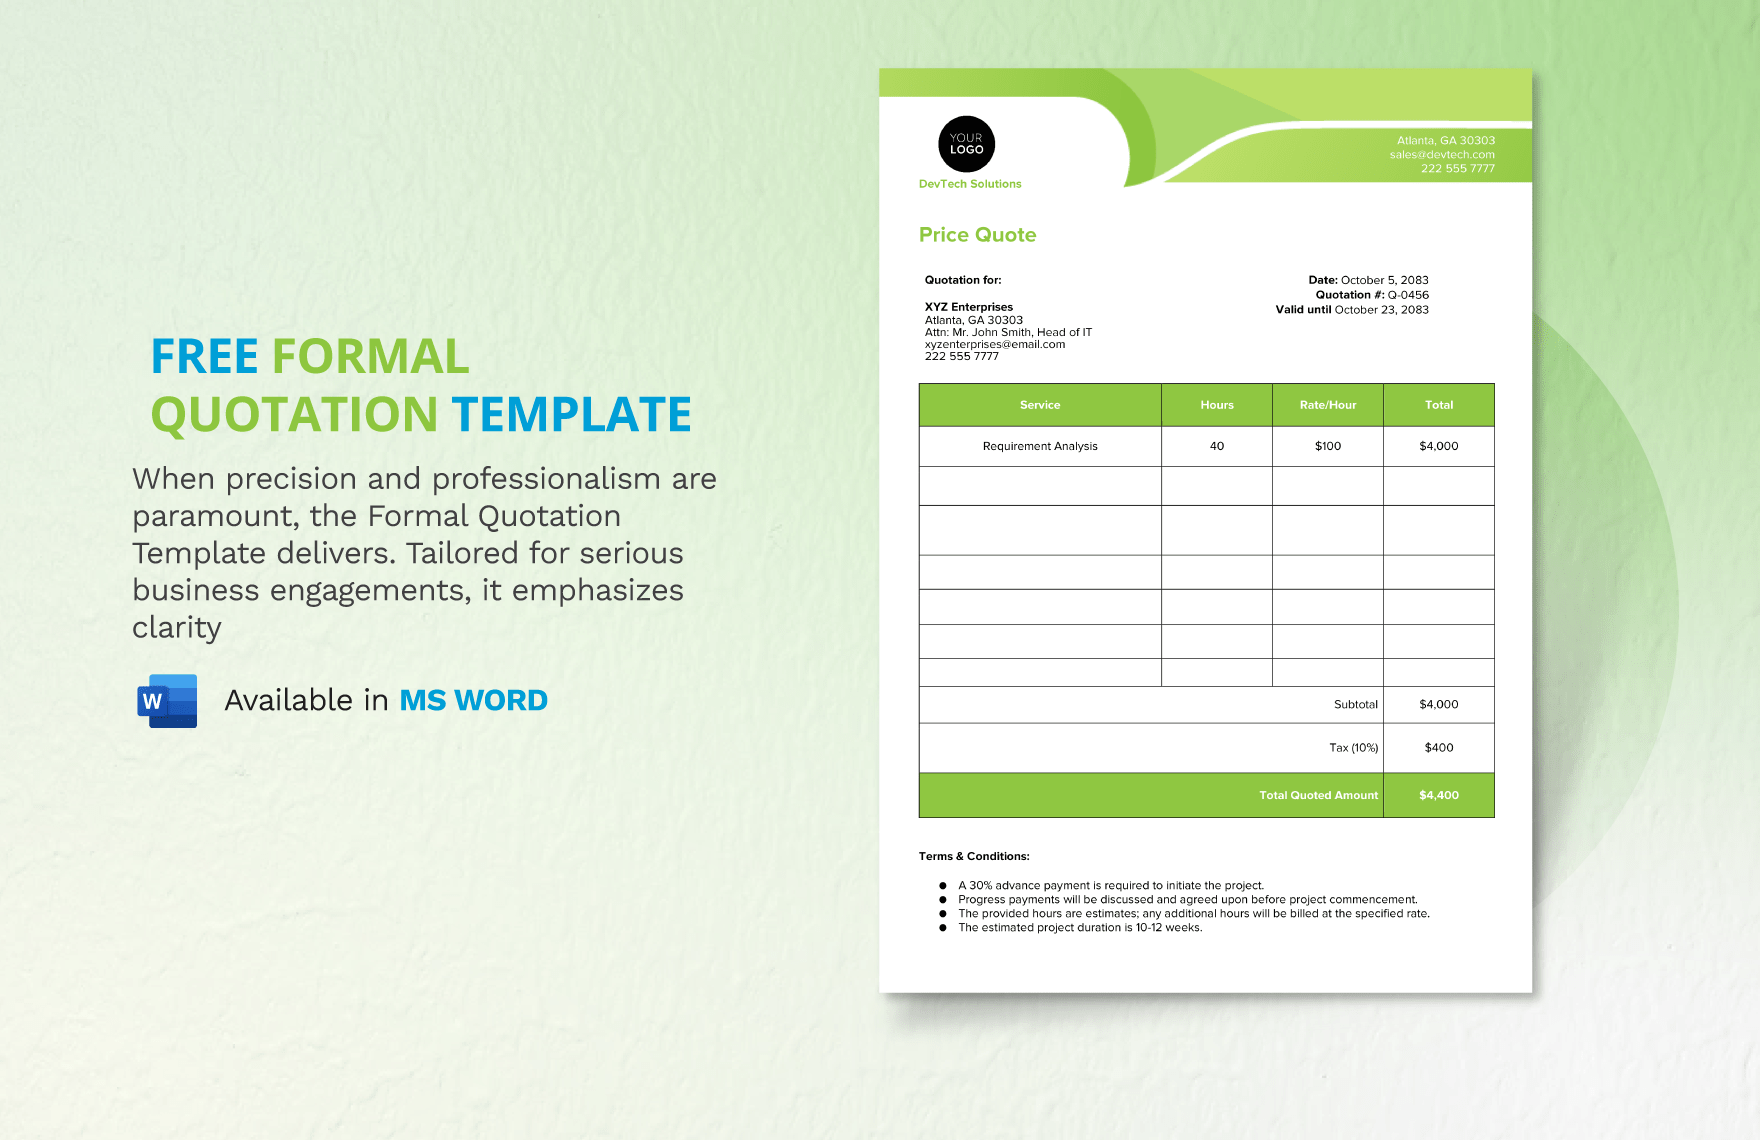 Free Formal Quotation Template